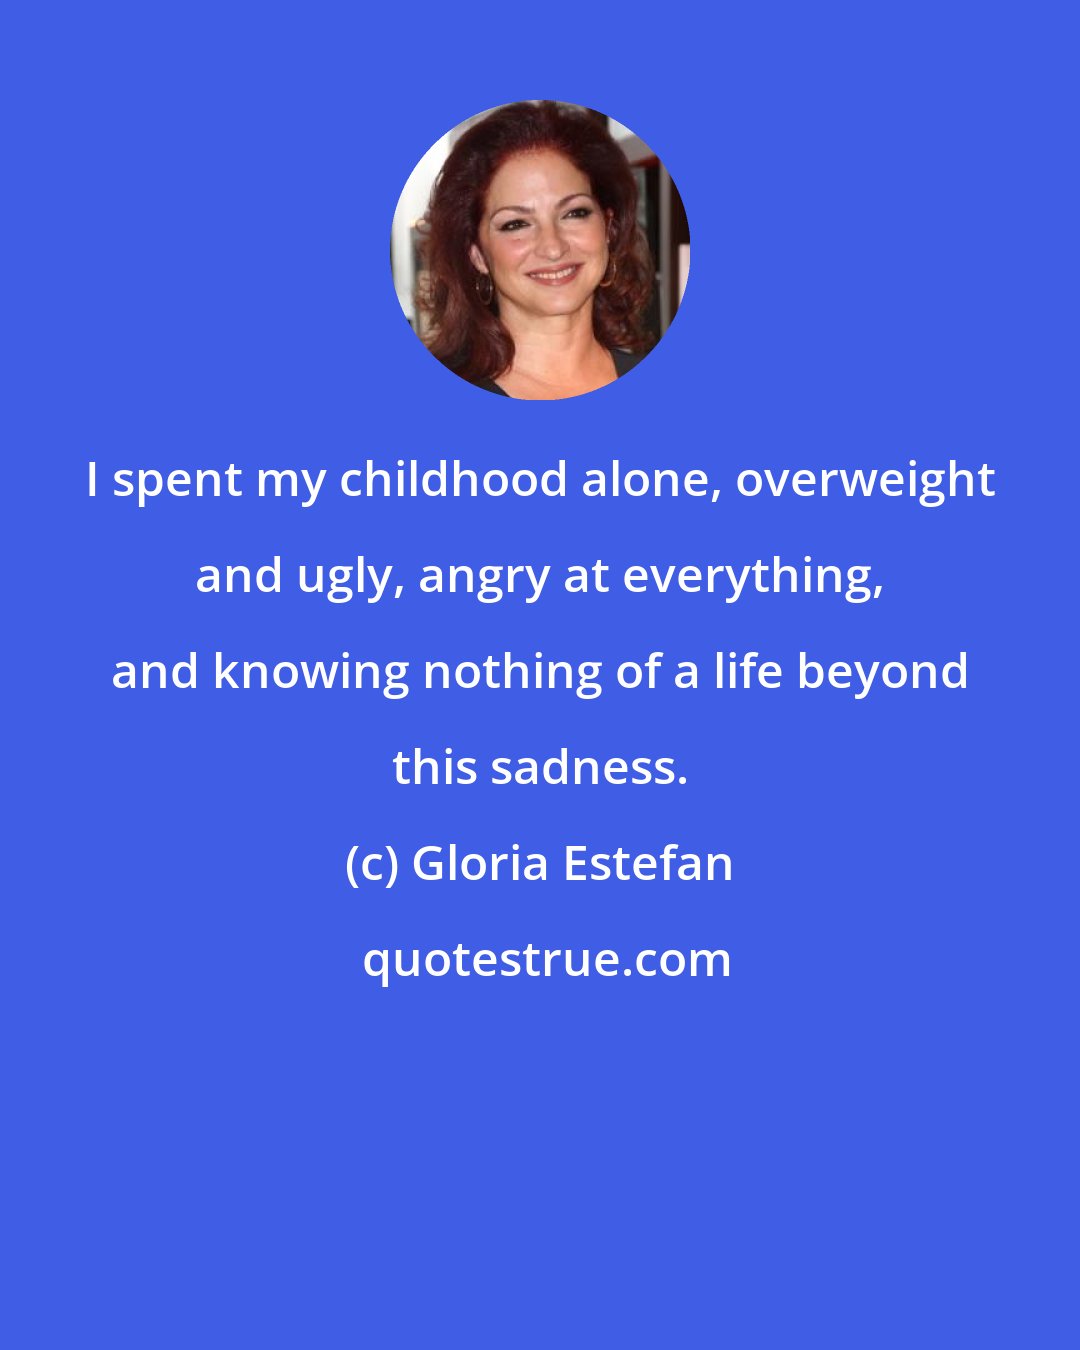 Gloria Estefan: I spent my childhood alone, overweight and ugly, angry at everything, and knowing nothing of a life beyond this sadness.